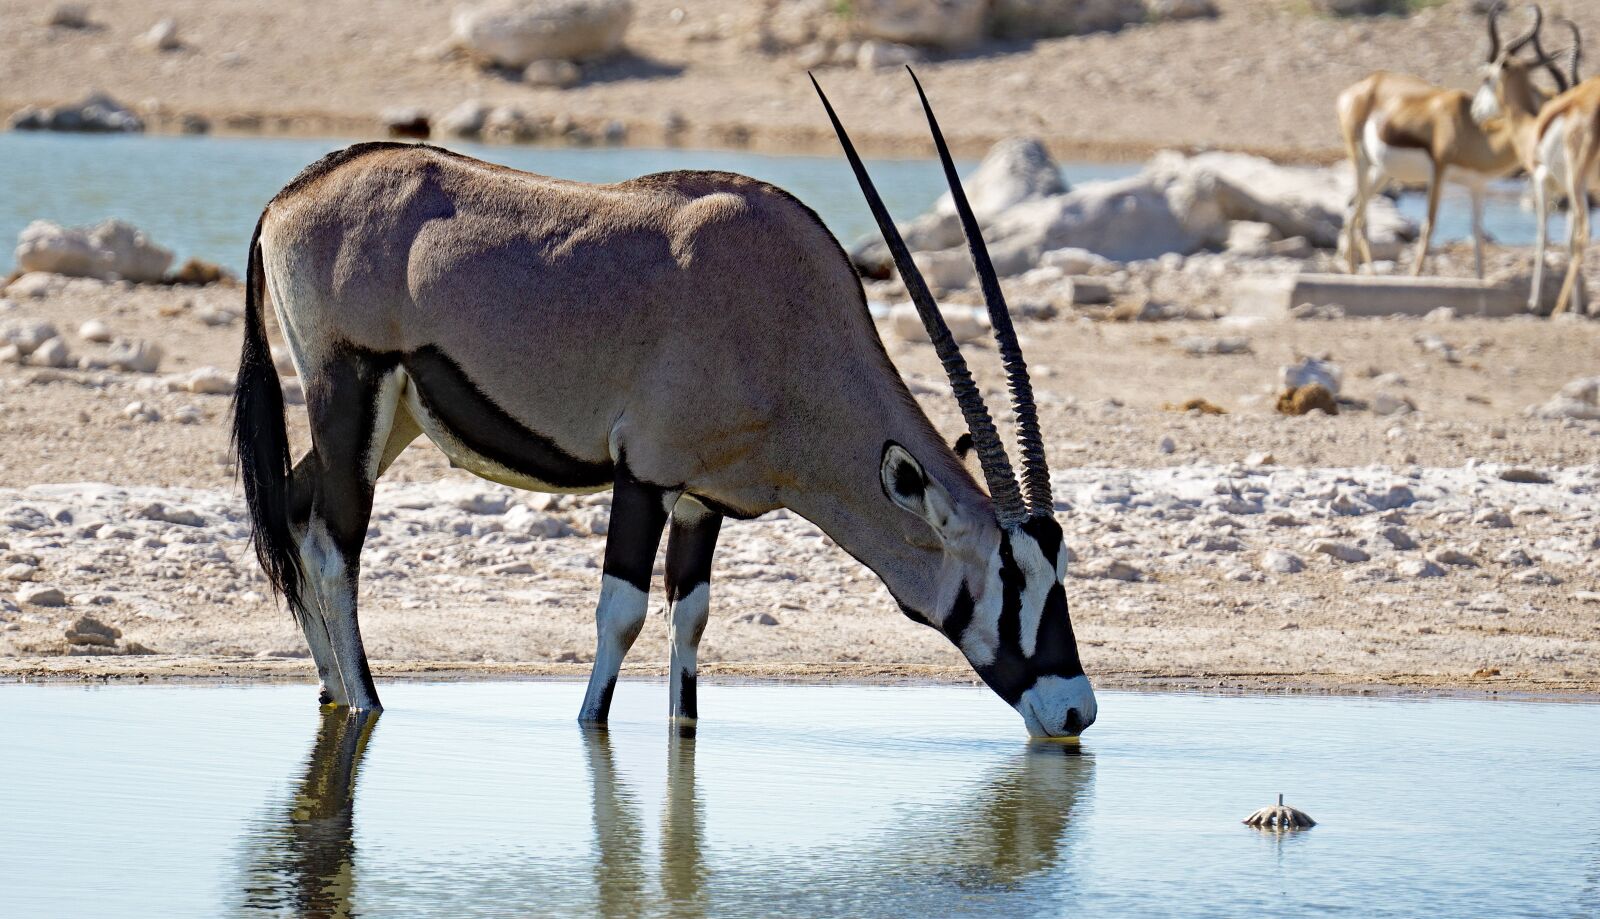 Sony a6000 + Sony FE 70-300mm F4.5-5.6 G OSS sample photo. Oryx antilope, water, nature photography